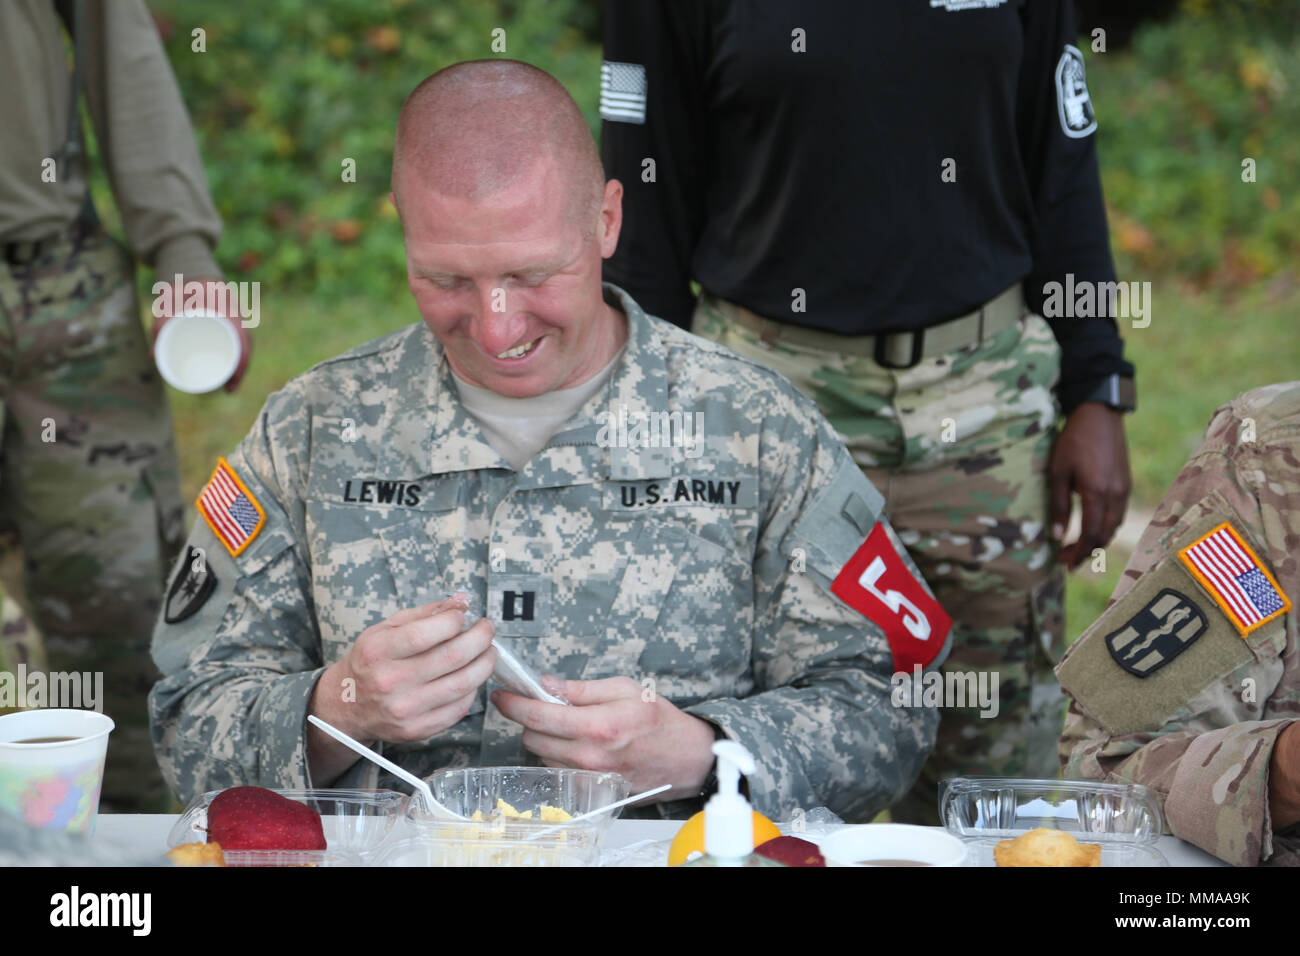 U.S. Army Capt. Jeremy Lewis, assigned to the Public Health Command - Atlantic, enjoys a hot breakfast after completing the 2017 Best Medic Competition at Fort Bragg, N.C., Sept. 20, 2017. The competition tested the physical and mental toughness, as well as the technical competence, of each medic to identify the team moving forward to represent the region at the next level of the competition.  (U.S. Army photo by Pfc. Meleesa Gutierrez) Stock Photo